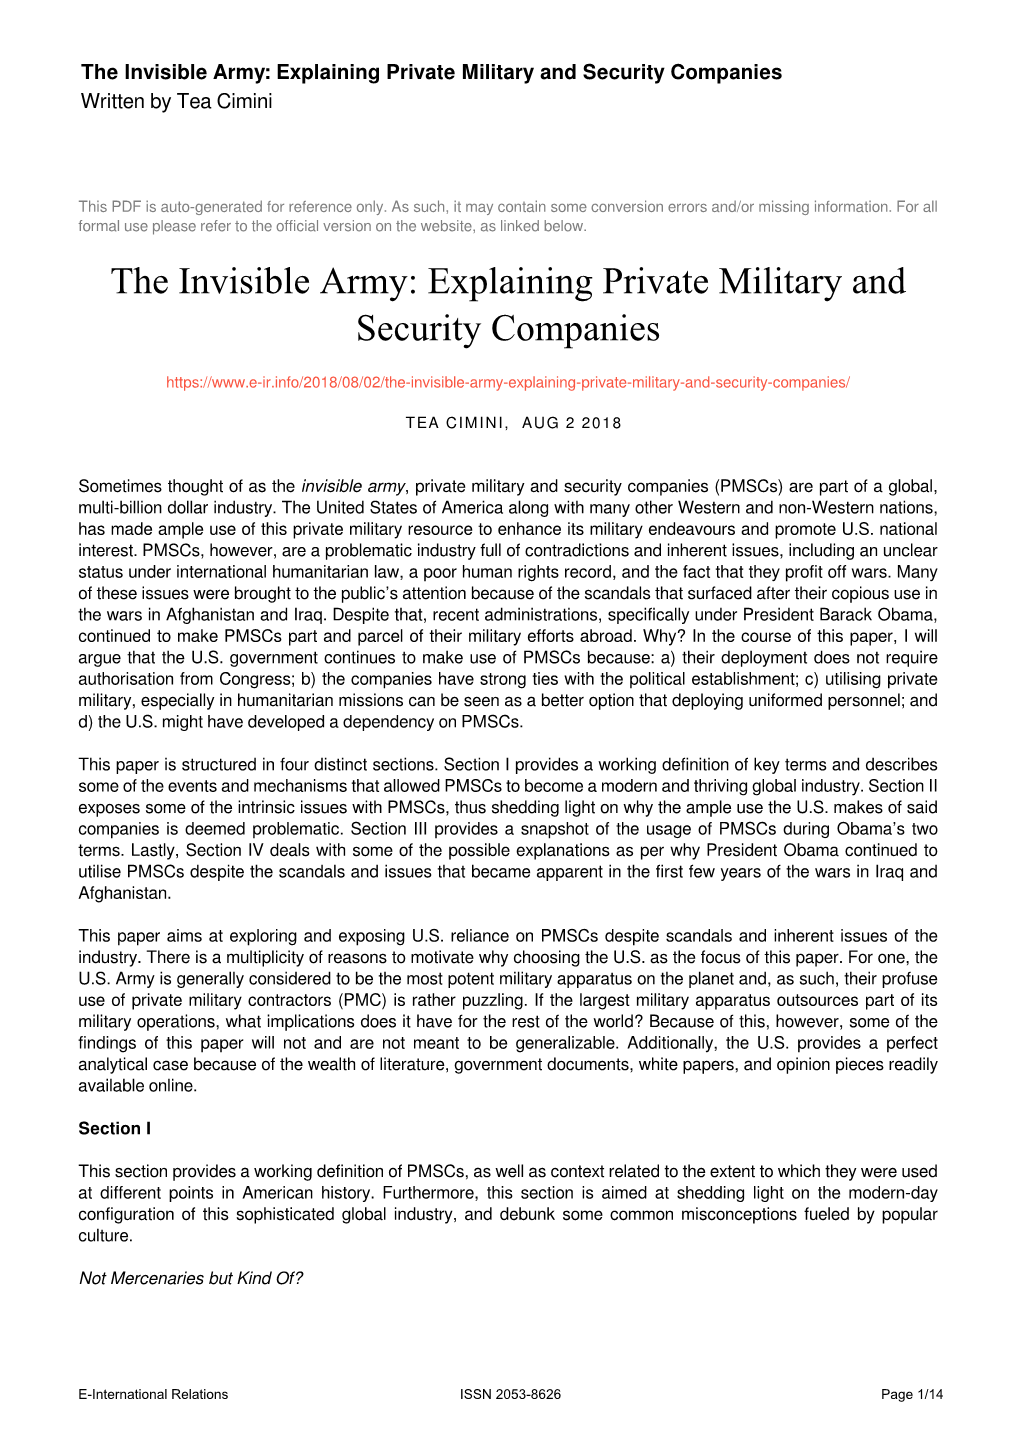 The Invisible Army: Explaining Private Military and Security Companies Written by Tea Cimini